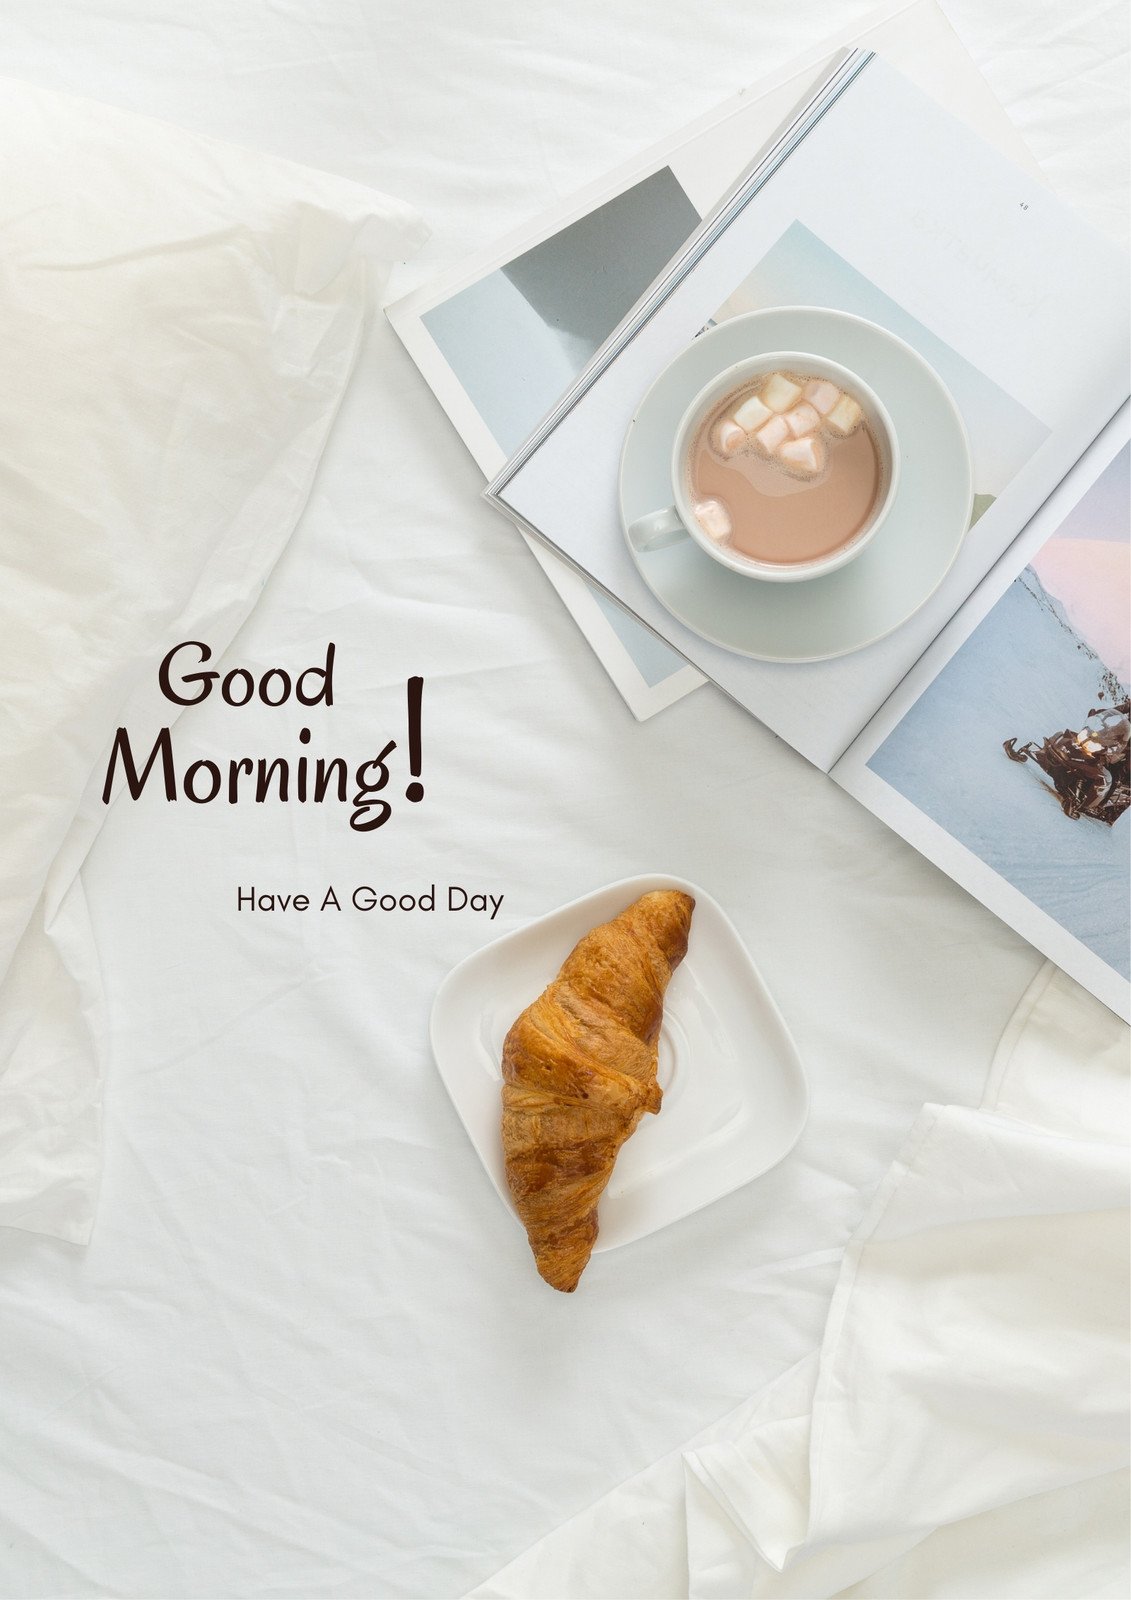 Page 17 - Customize 1,300+ Breakfast Poster Templates Online - Canva